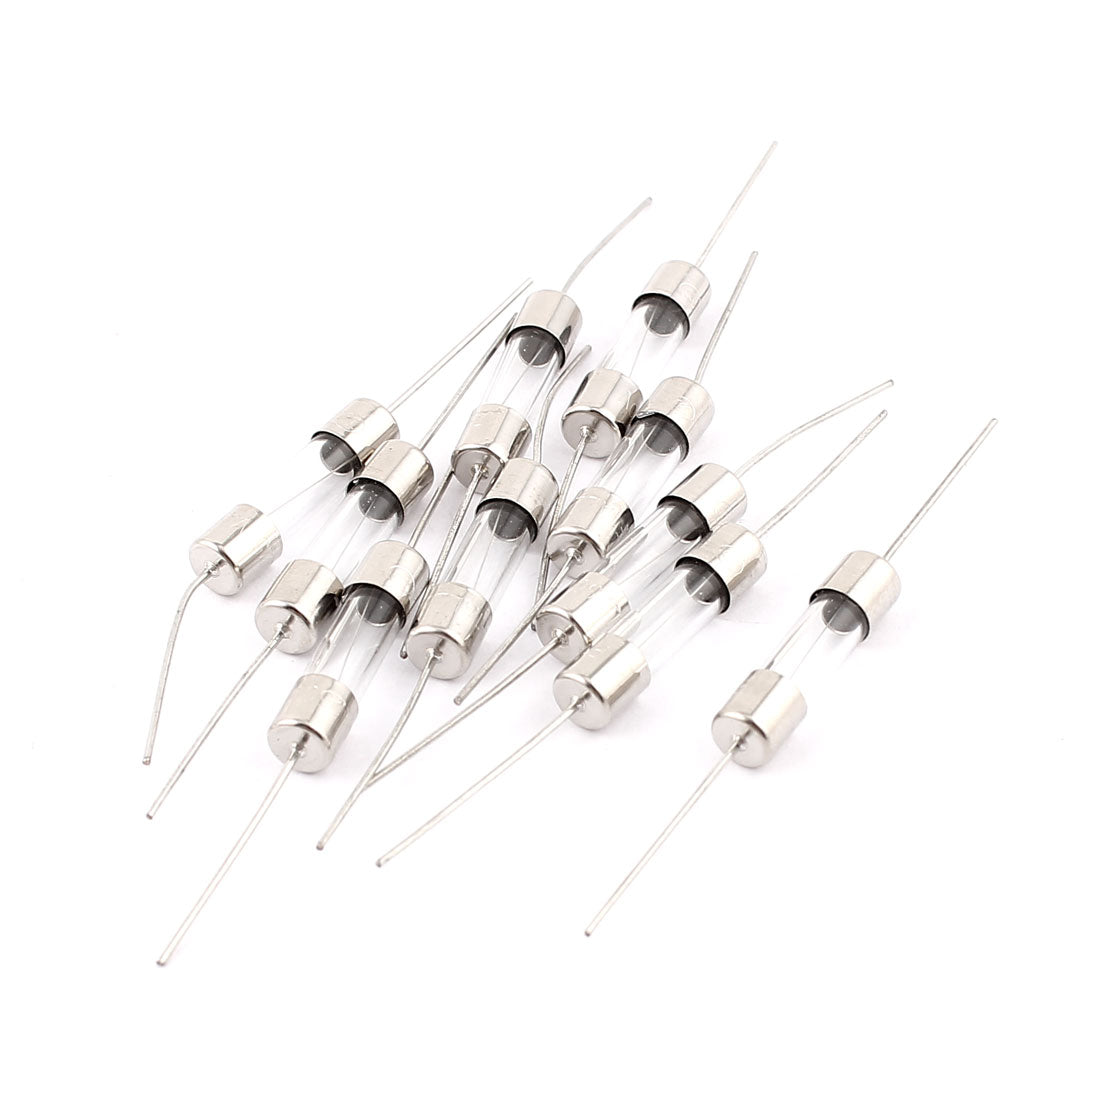 uxcell Uxcell Electrical Fast Blow Axial Leaded Glass Tube Fuses 5 x 20mm 250V 1A 10pcs